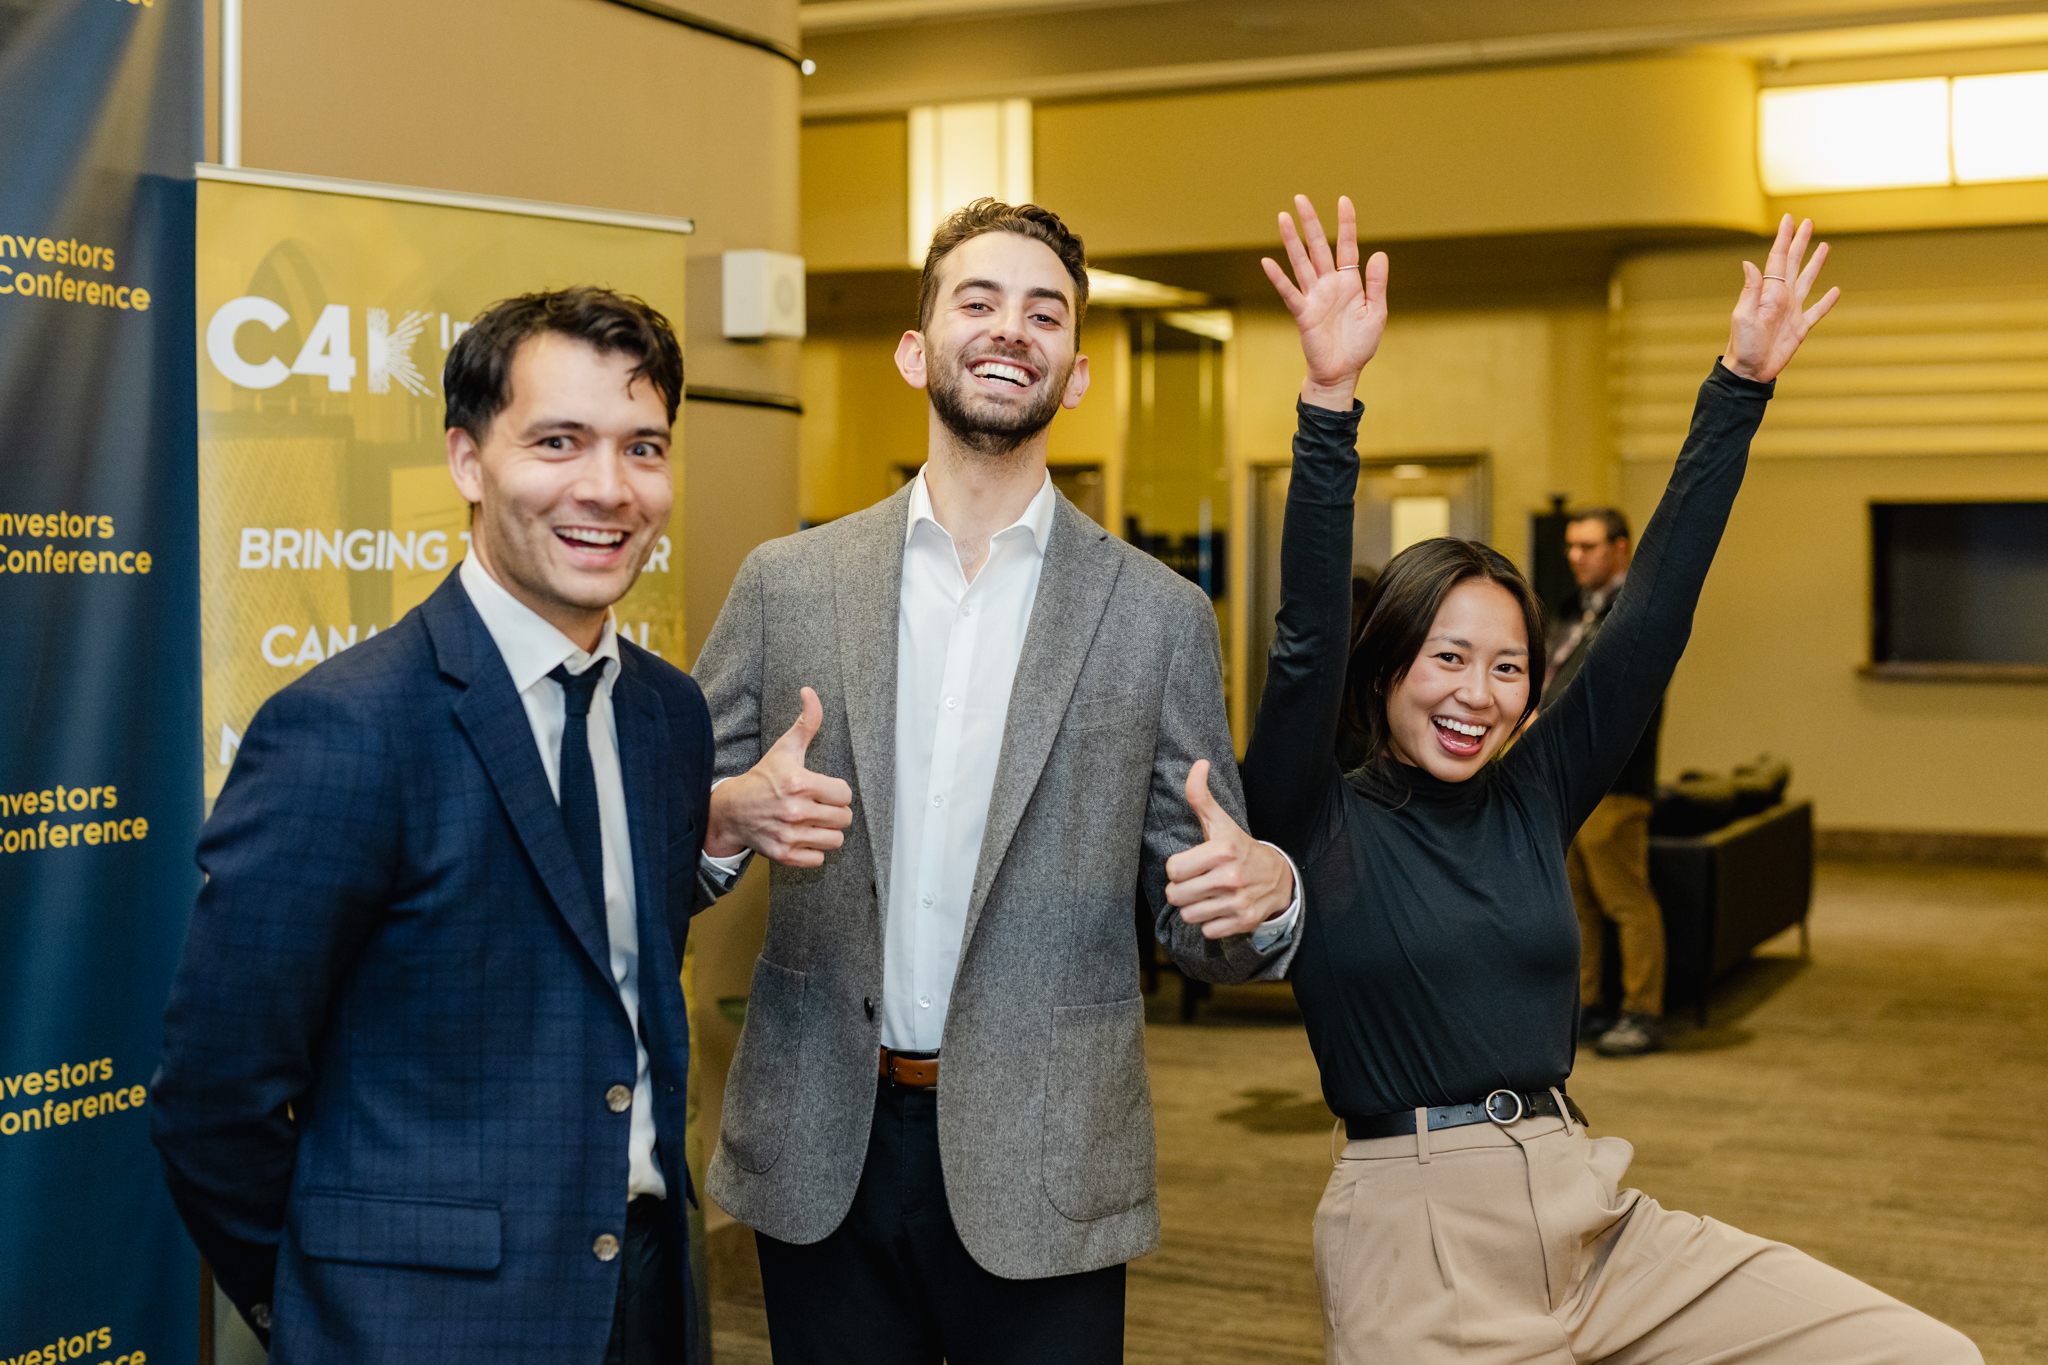 Three people at a conference posing for a photo with thumbs up.